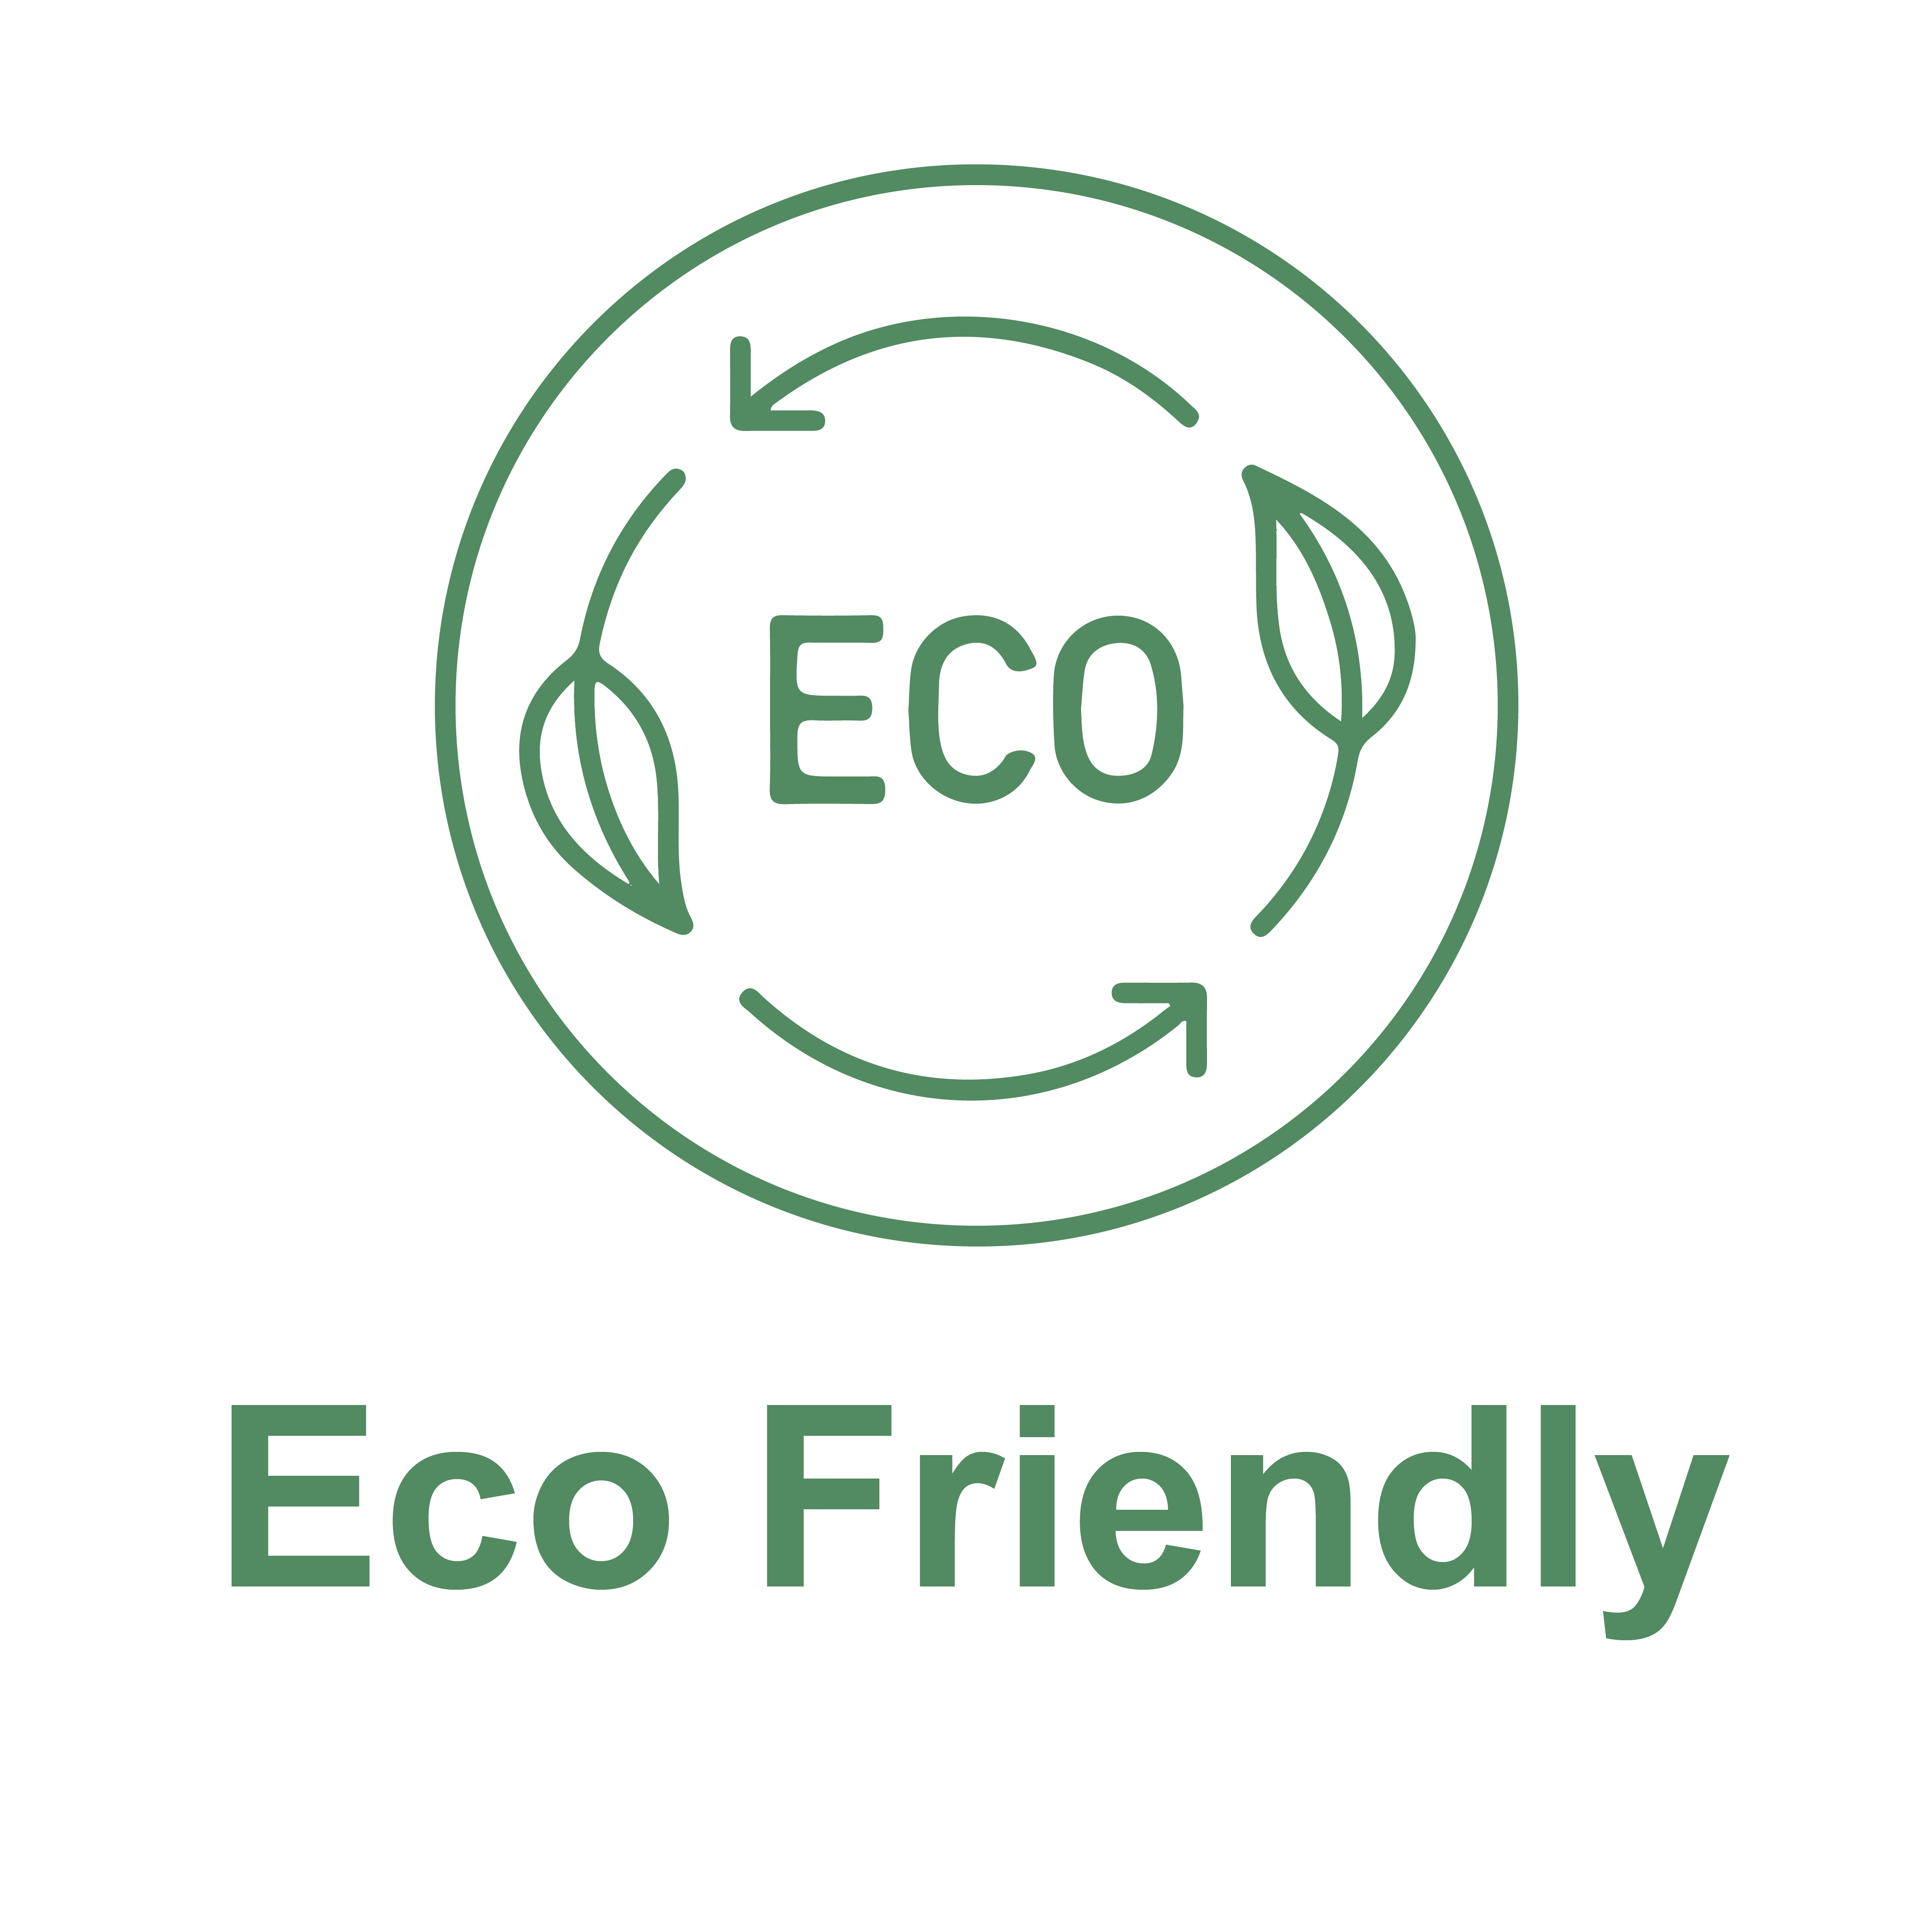 This product is Eco Friendly.